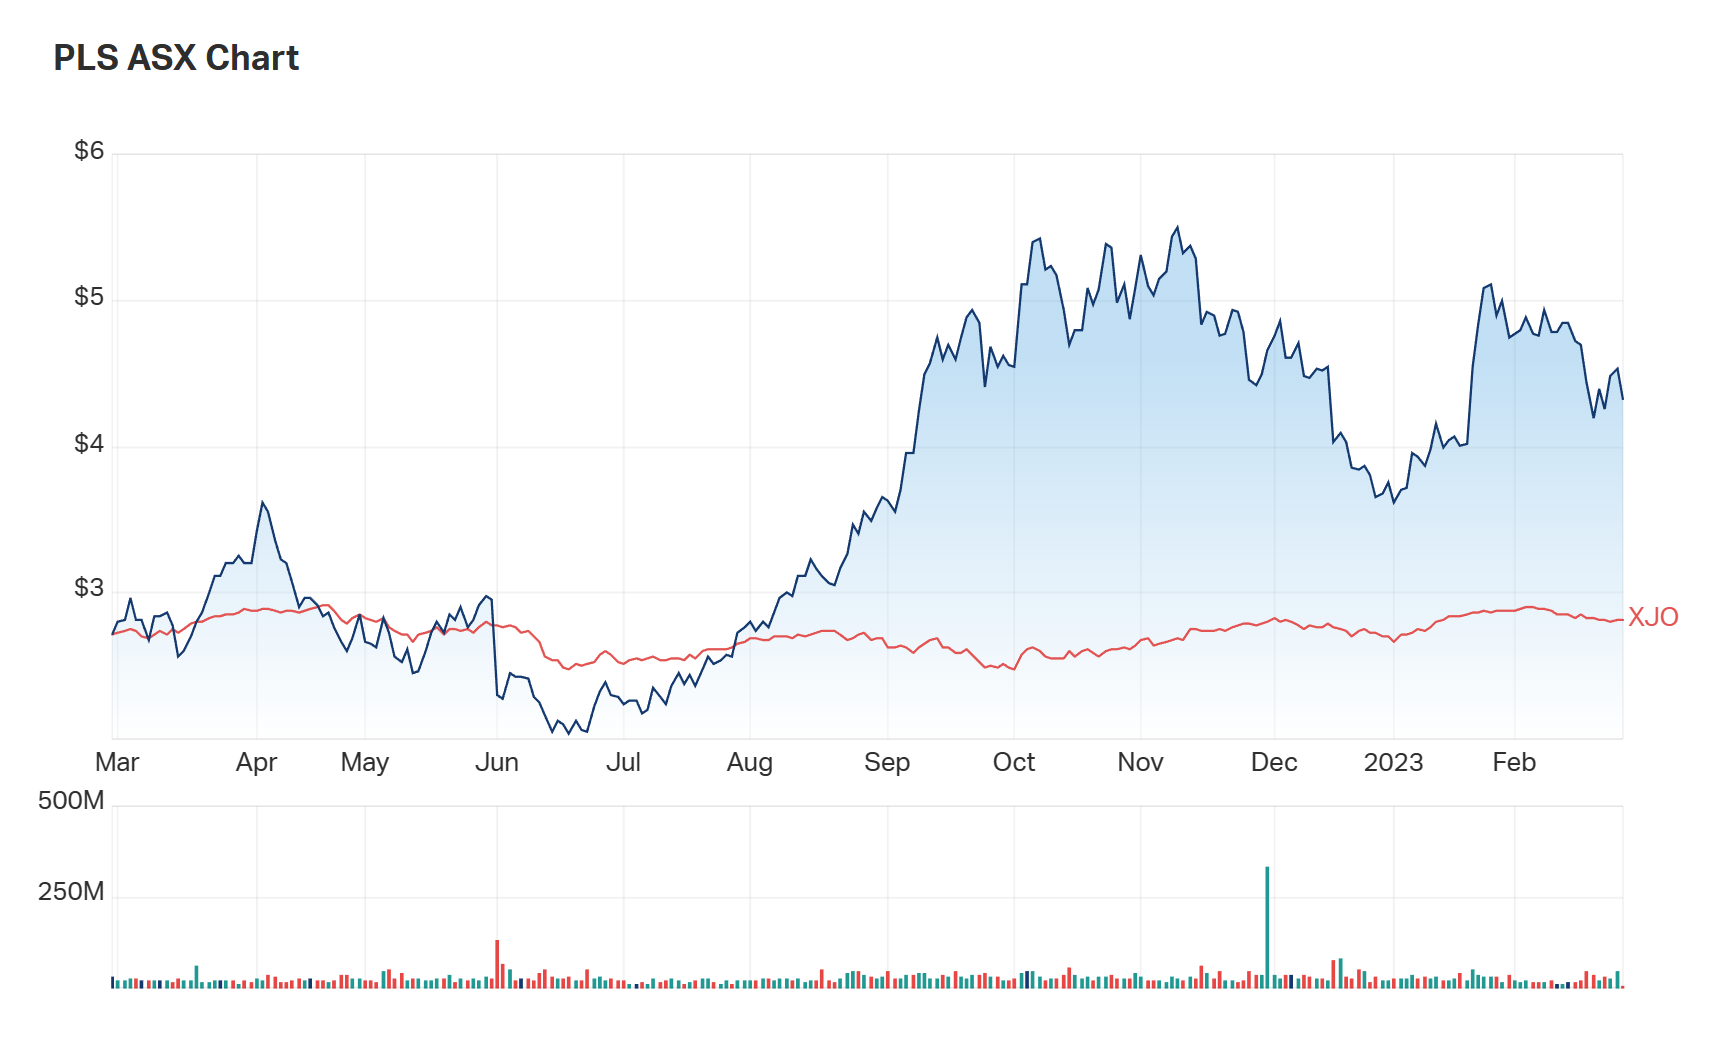 A look at Pilbara Minerals' one year performance charts vs. the ASX200 